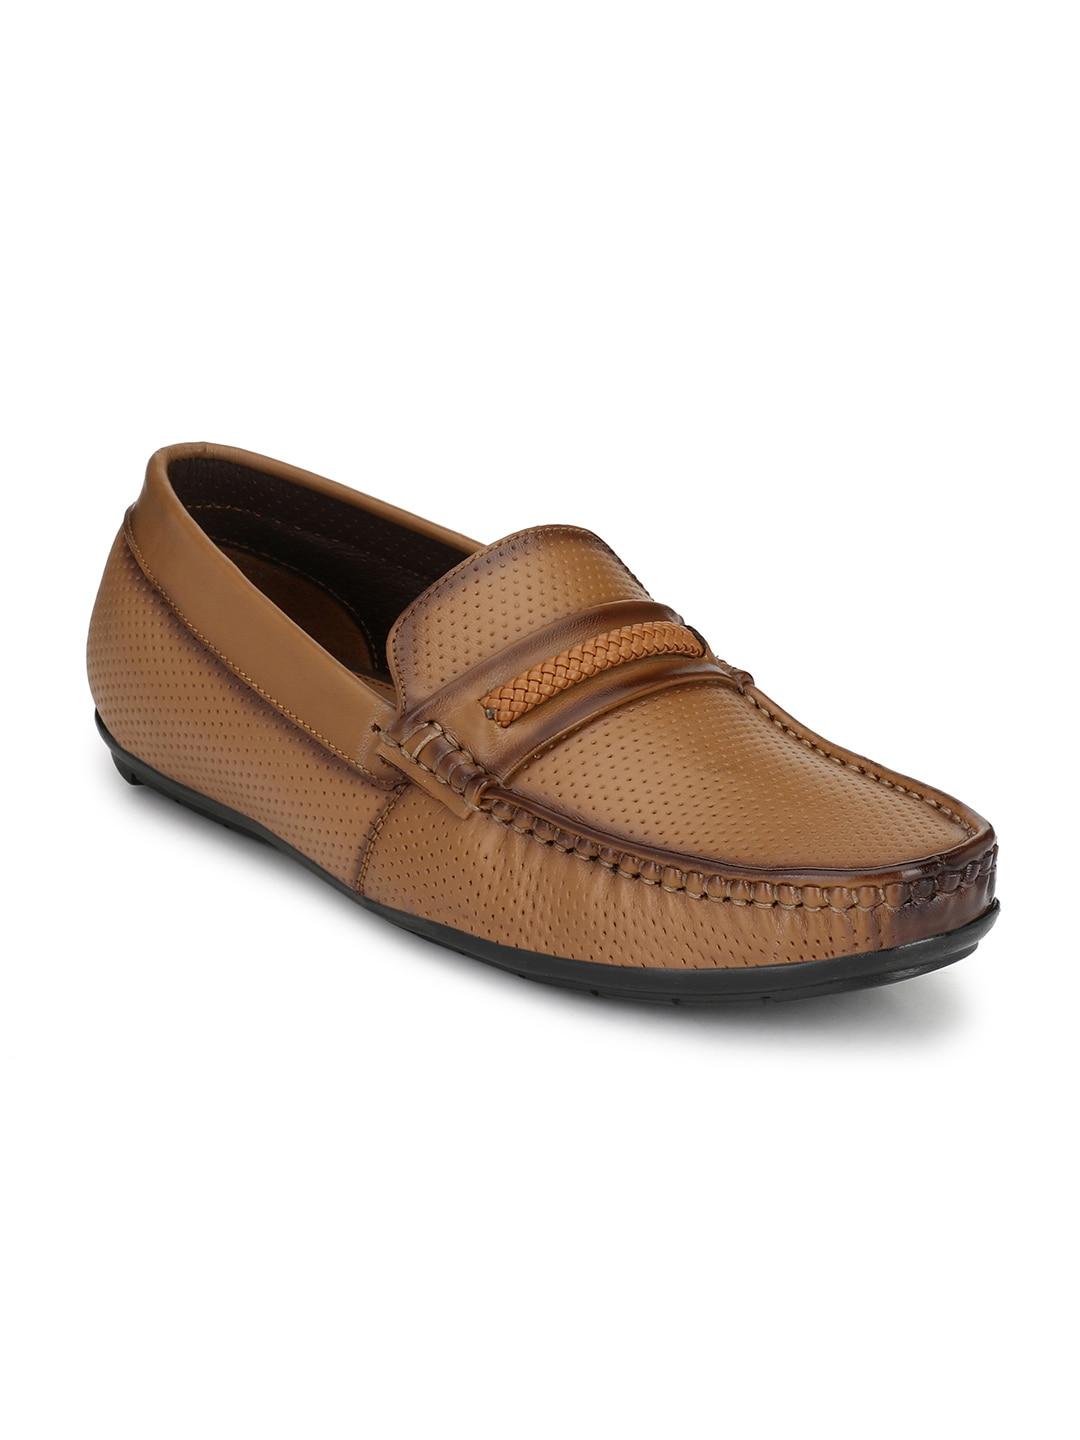 hirels men perforations leather loafers